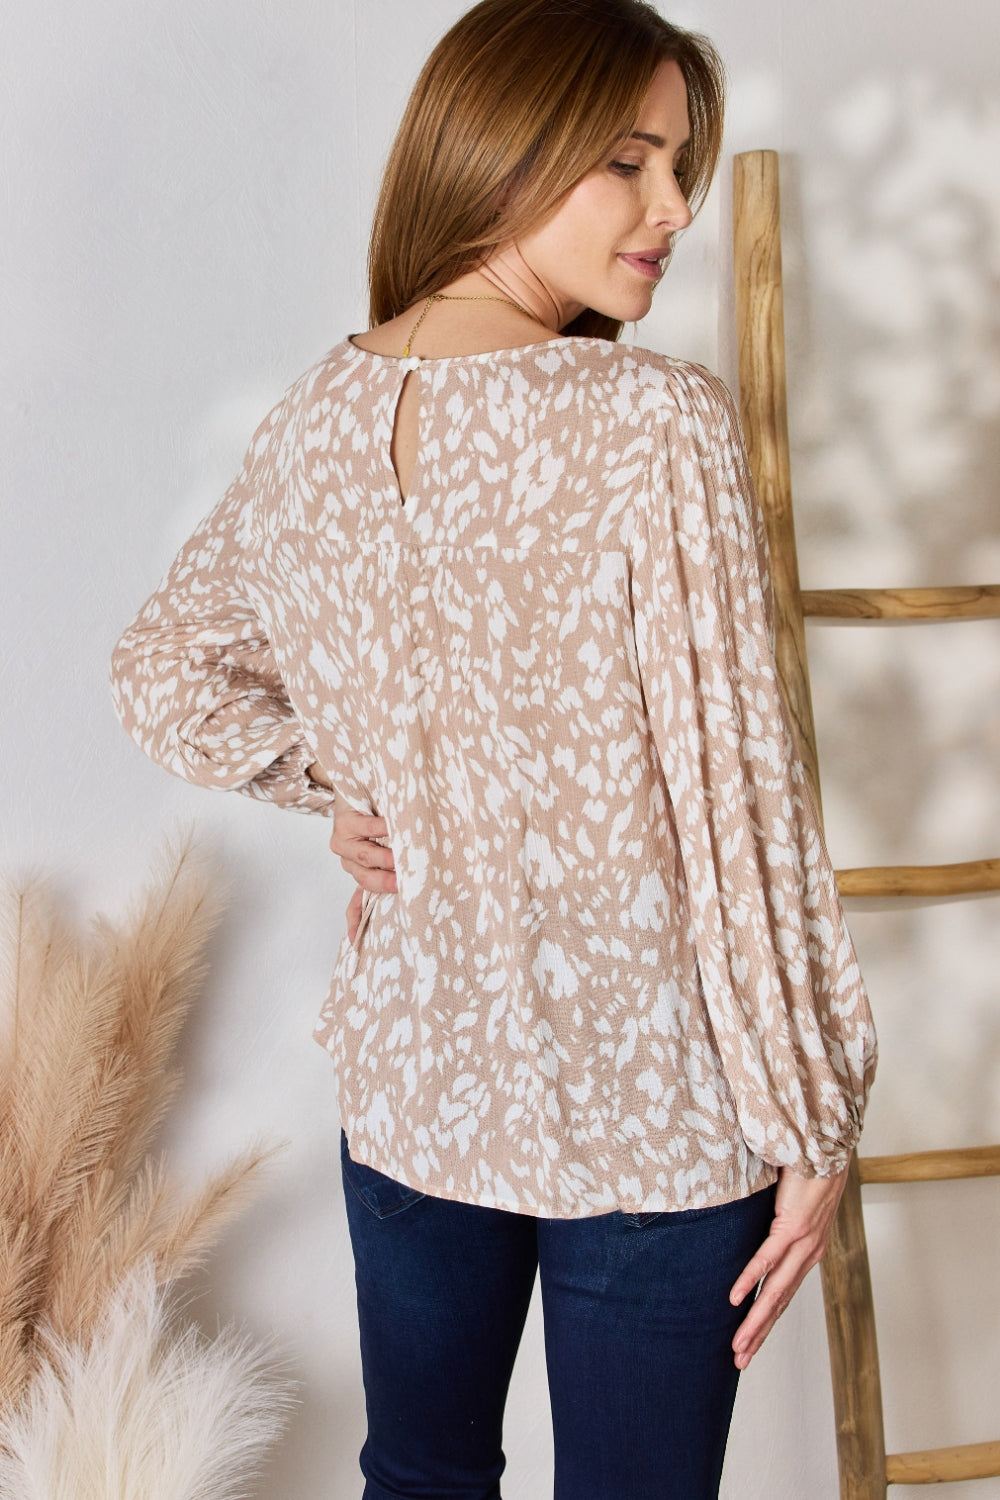 Balloon Sleeve Blouse - Embroidered - Taupe - Inspired Eye Boutique